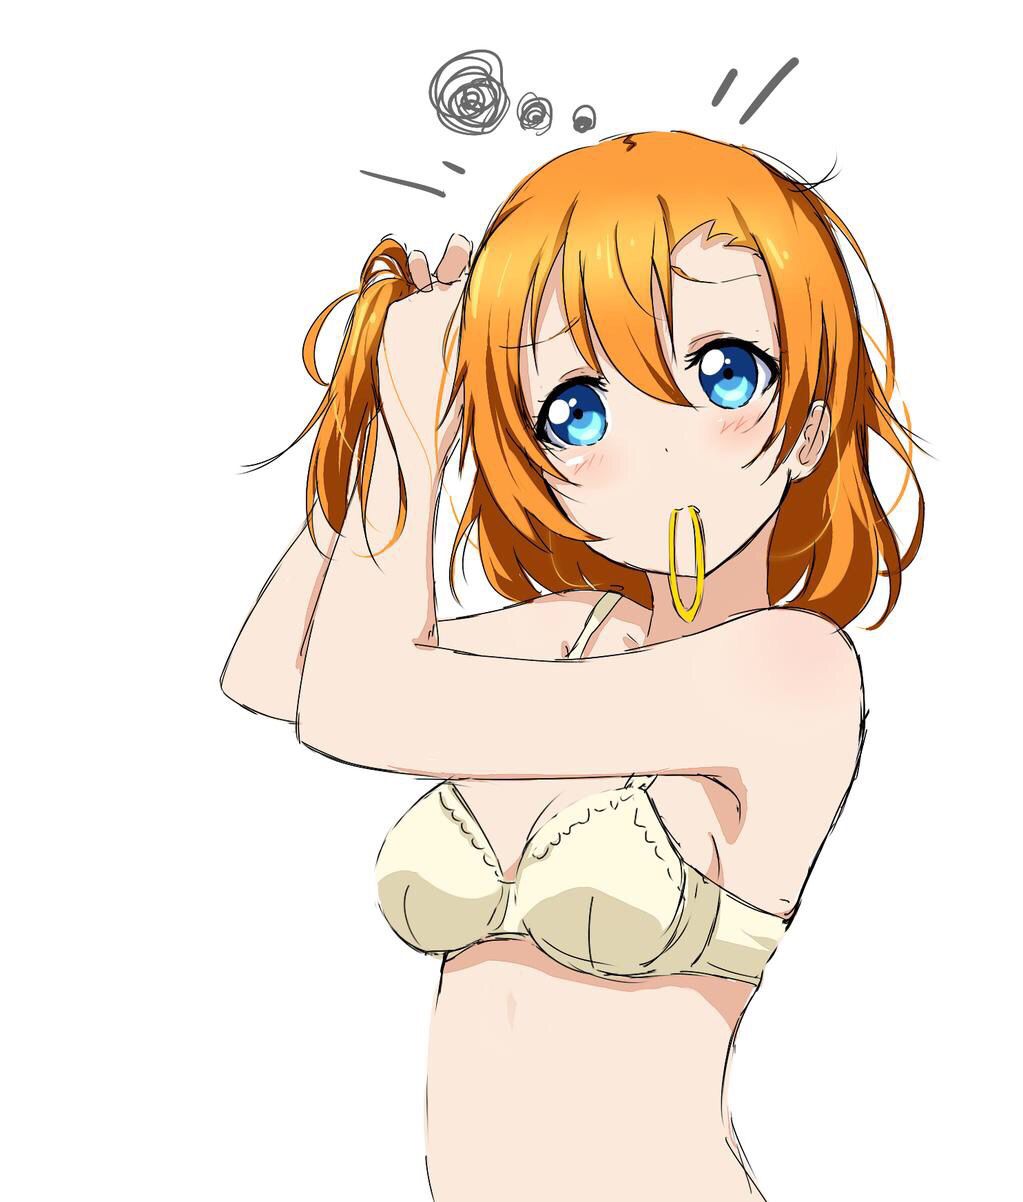 [God images] "love live! ' Erotic to a healthy ear Yoshino fruit Chan. illustrations and was once it's lost wwwww 4